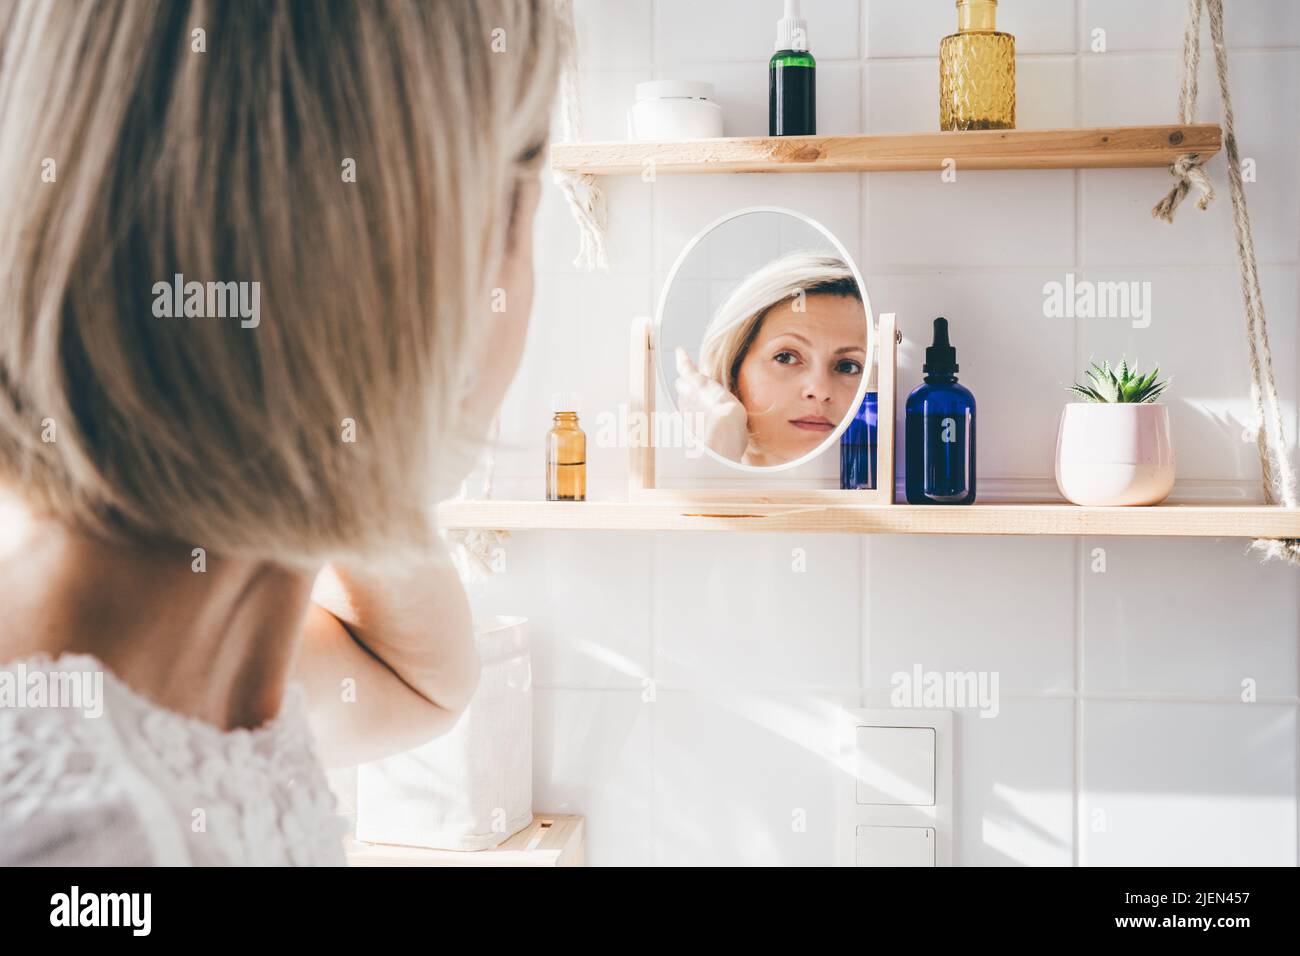 Beautiful middle-aged woman looking in the mirror in white eco friendly bathroom. Wooden shleves and reusable cosmetics bottles. Wellnes concept Stock Photo